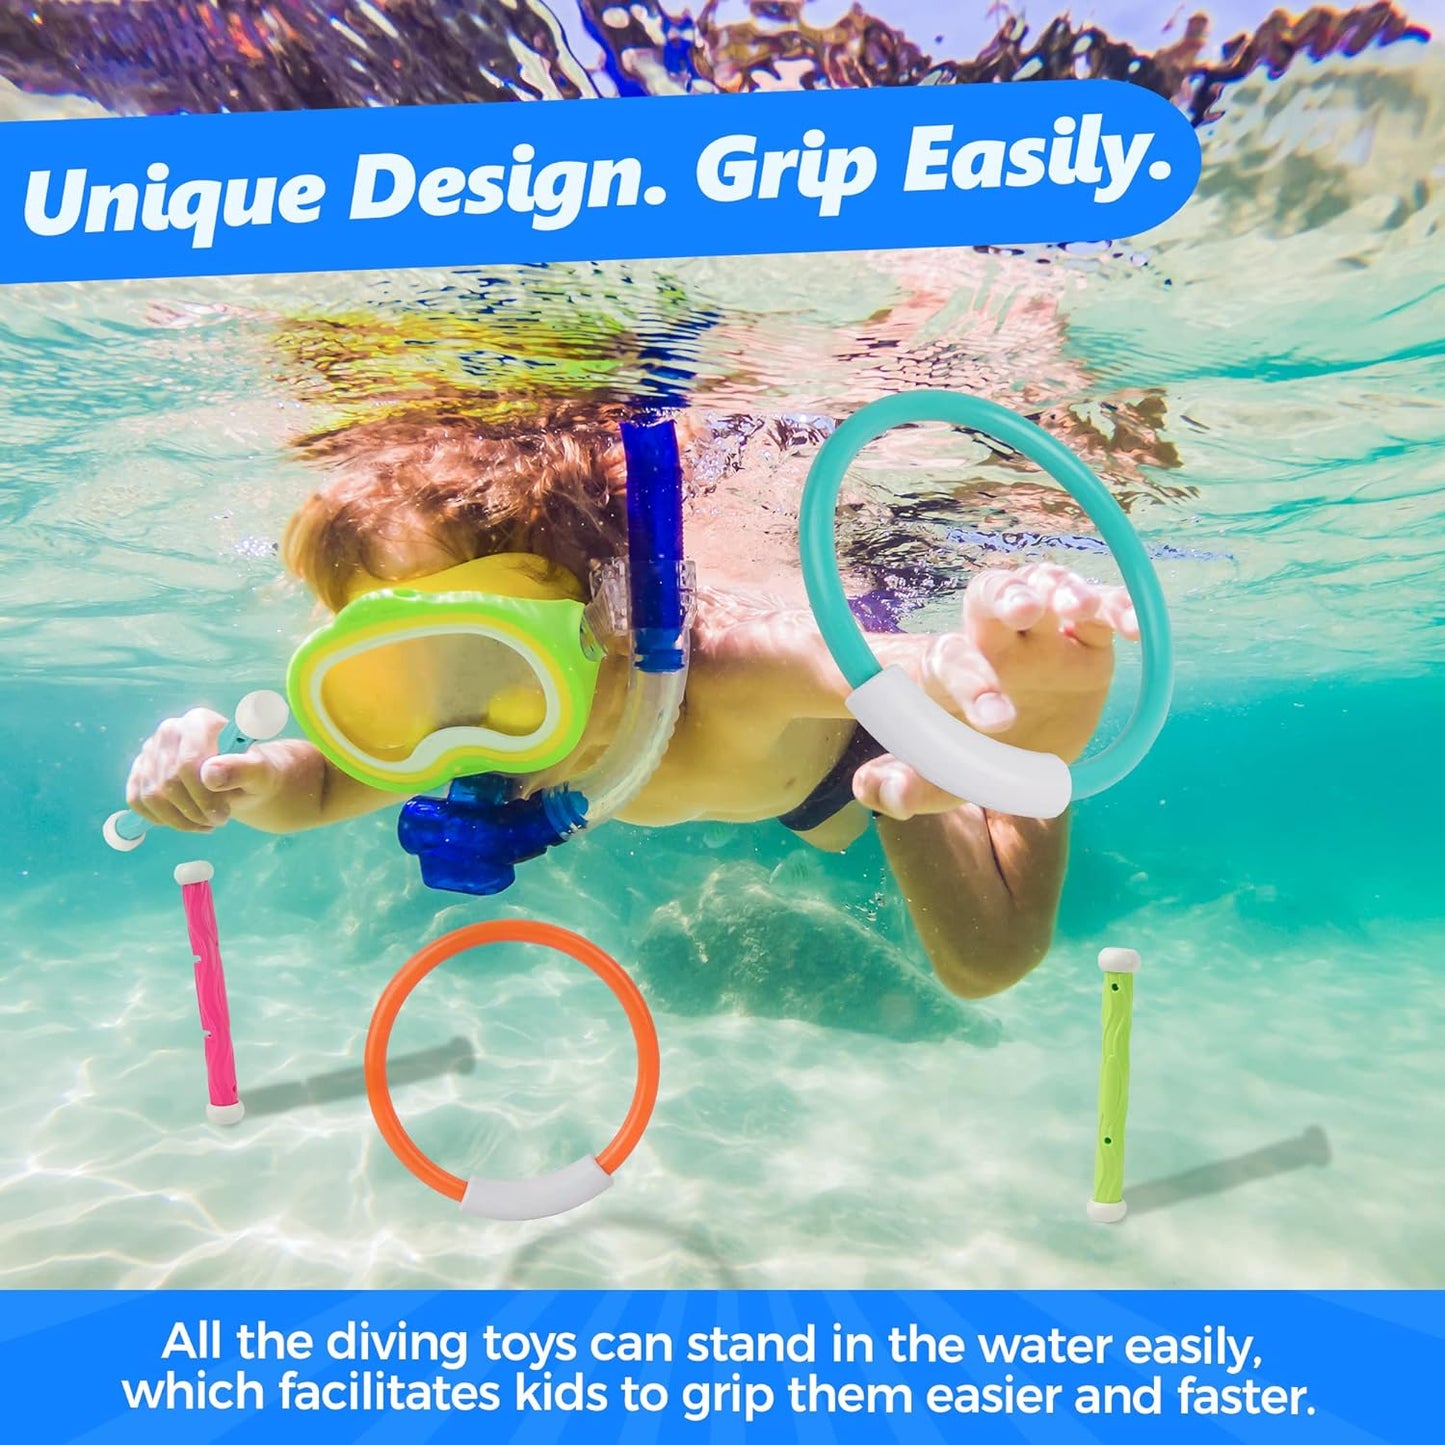 Pool Diving Toys - Underwater Swimming Pool Toys for Kids Ages 4-8 - Training Pool Diving Rings and Diving Sticks Gift Set, Summer Toys for Fun Water Toys Games